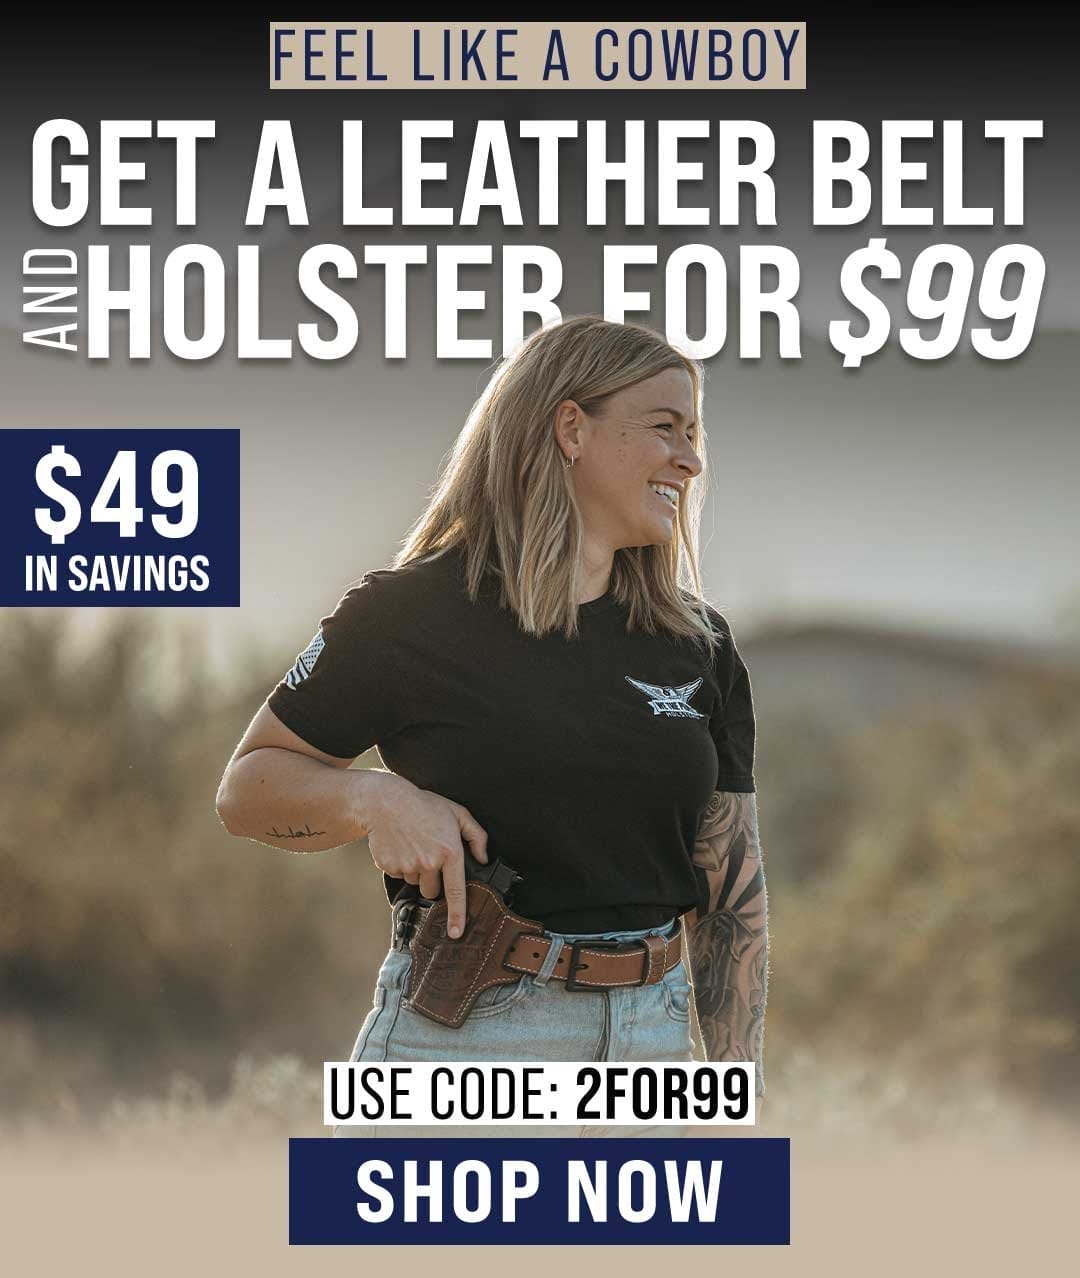 Buy One, Get One 50% OFF Leather Holsters